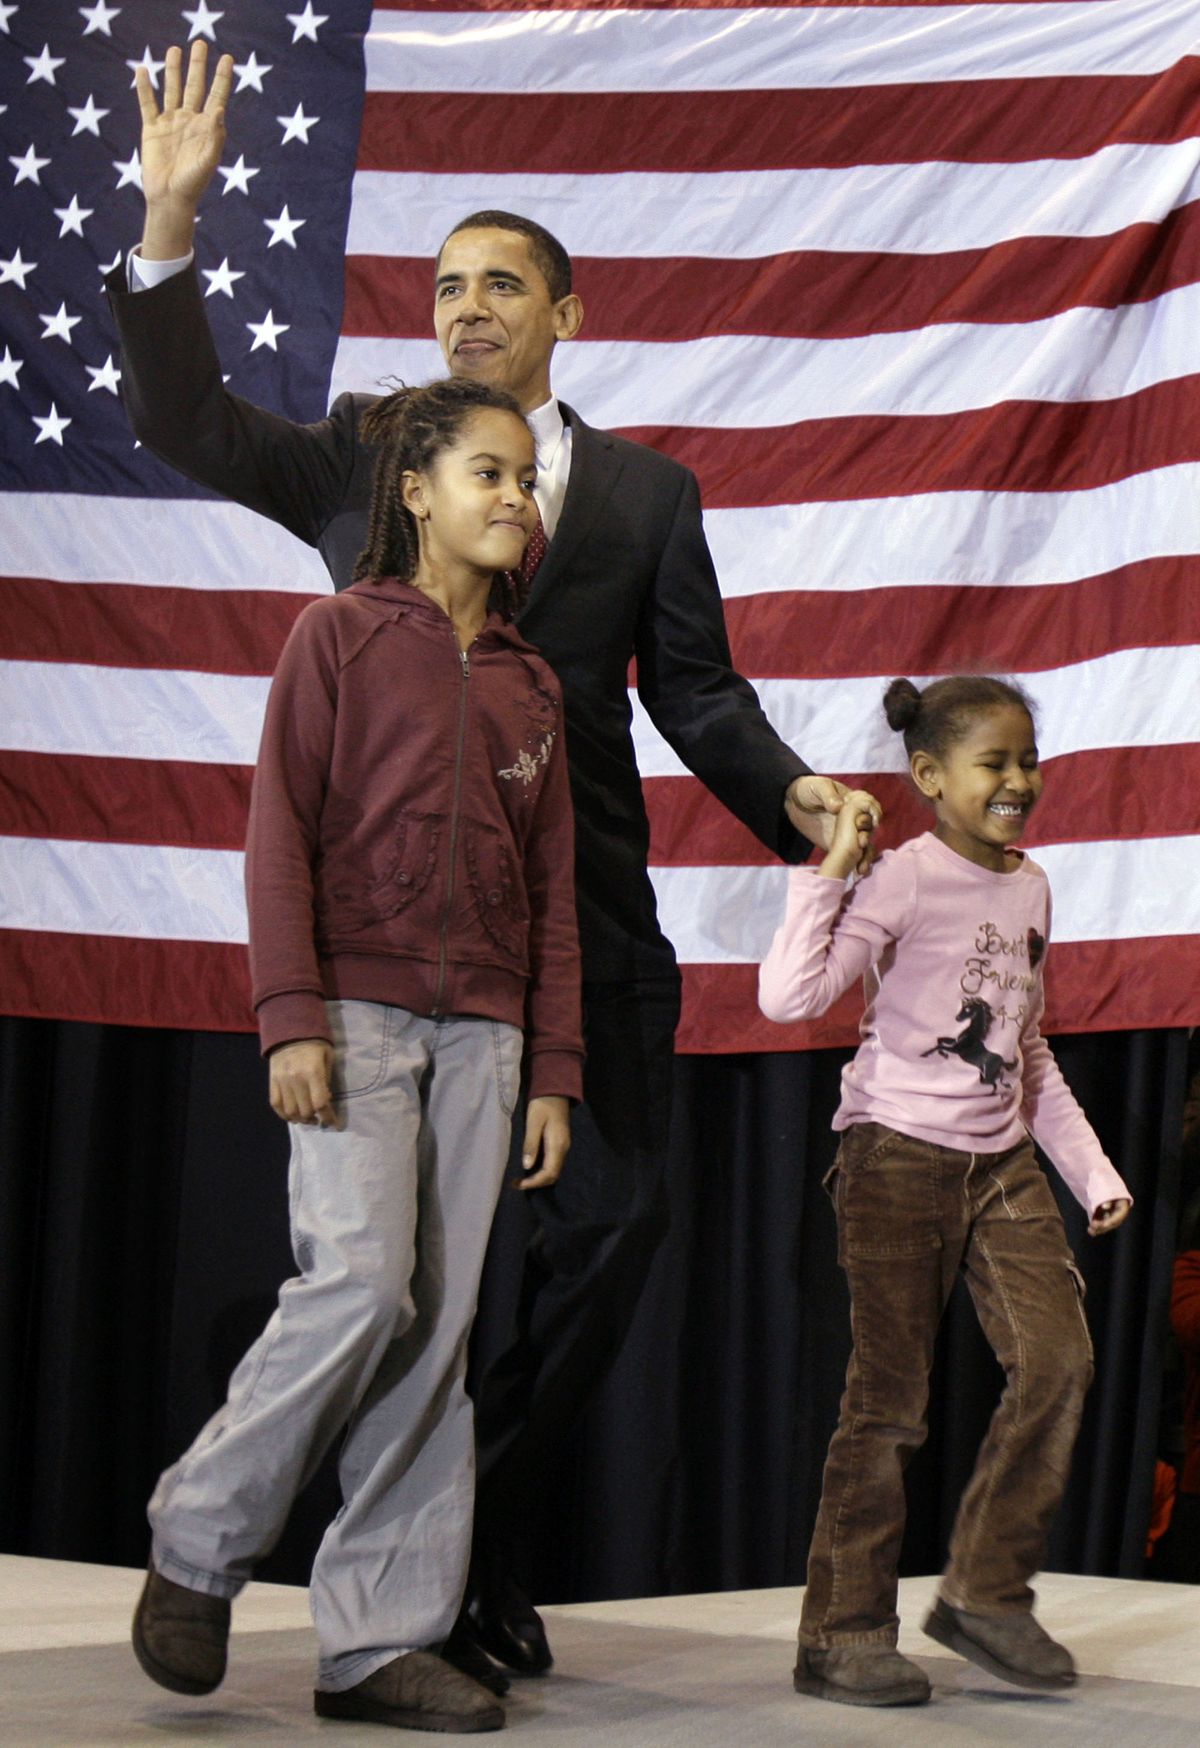 President-elect Barack Obama and his daughters Malia, left, and Sasha, leave the stage after a campaign event in Des Moines, Iowa, earlier this year. Caring for the children and the country will be a major challenge for the Obamas, but they may get some help from Michelle Obama’s mother, who could move into the White House and be with the kids while the parents are attending events on the road. (M. Green / The Spokesman-Review)